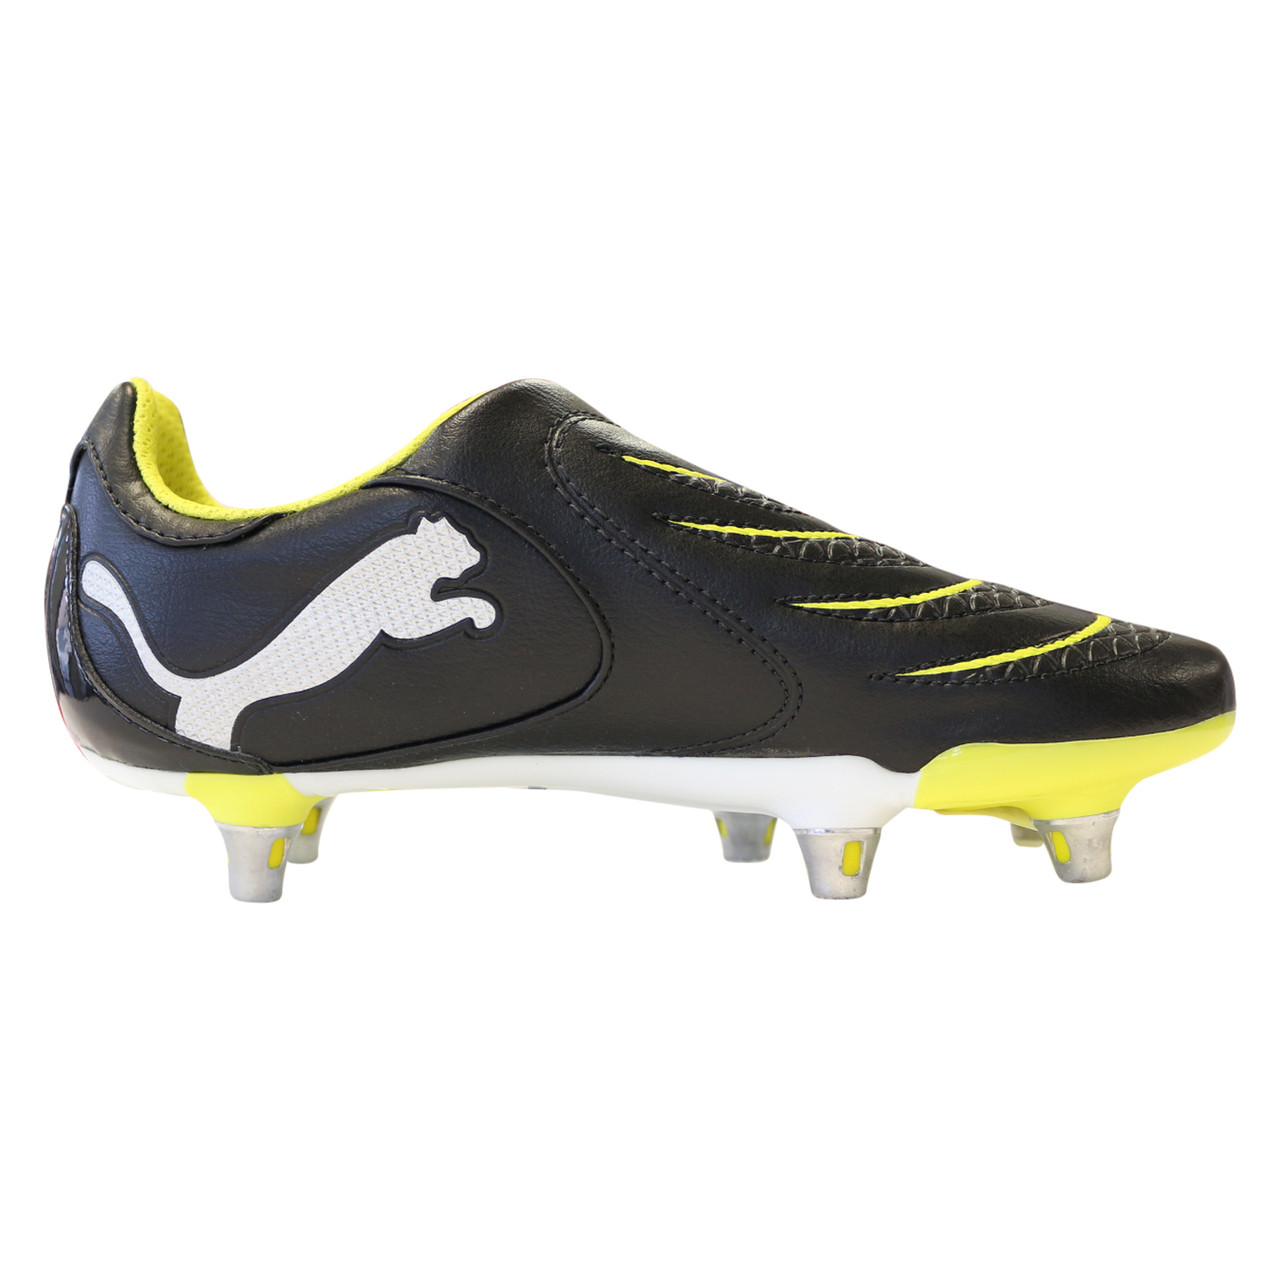 Puma - Powercat 3.10 Rugby Jr Boots - Black/Yellow on sale at Rugby City |  79.99